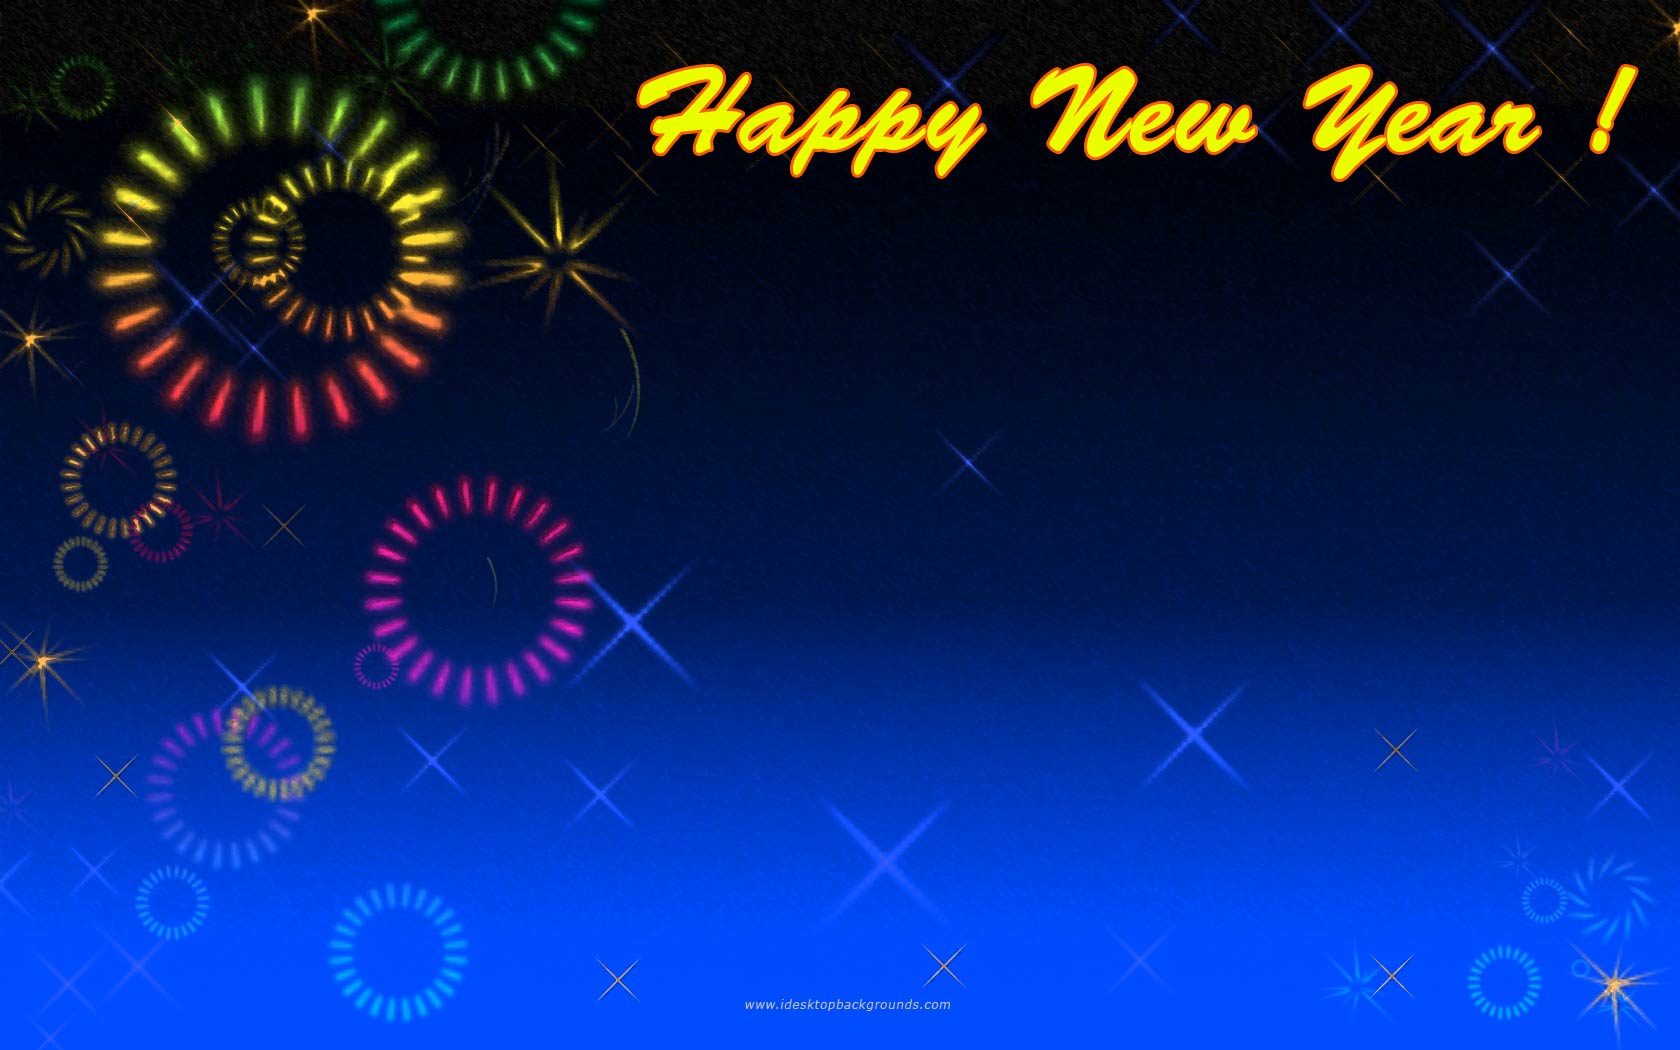 animated hd new year image